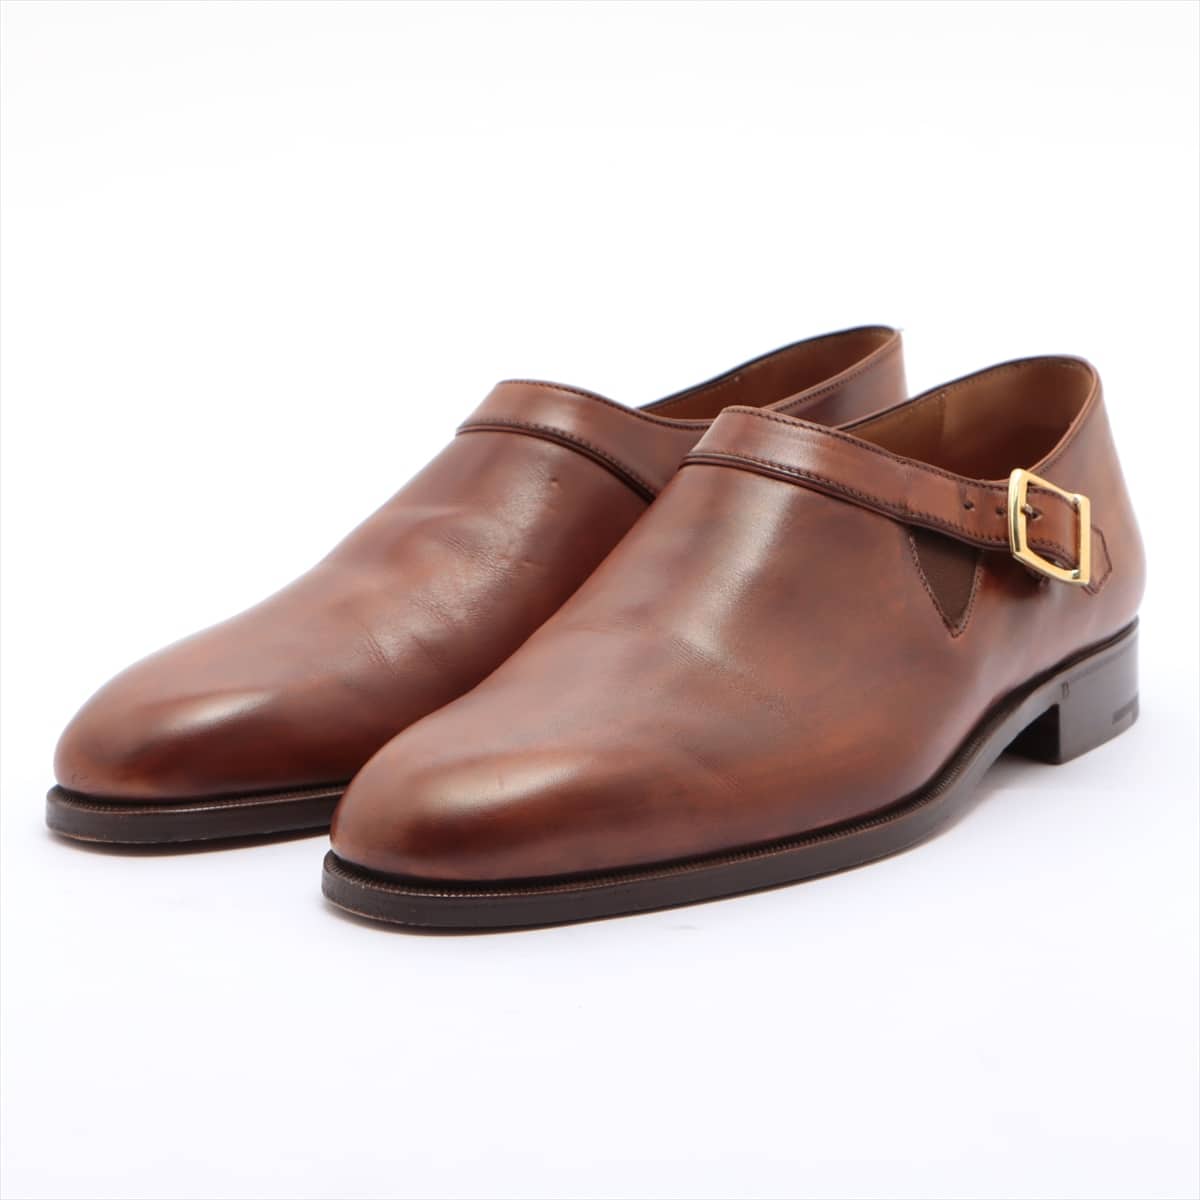 Berluti Leather Leather shoes 9 1/2 Men's Brown single monk Strap 1172 plain toe Comes with a regular shoe keeper